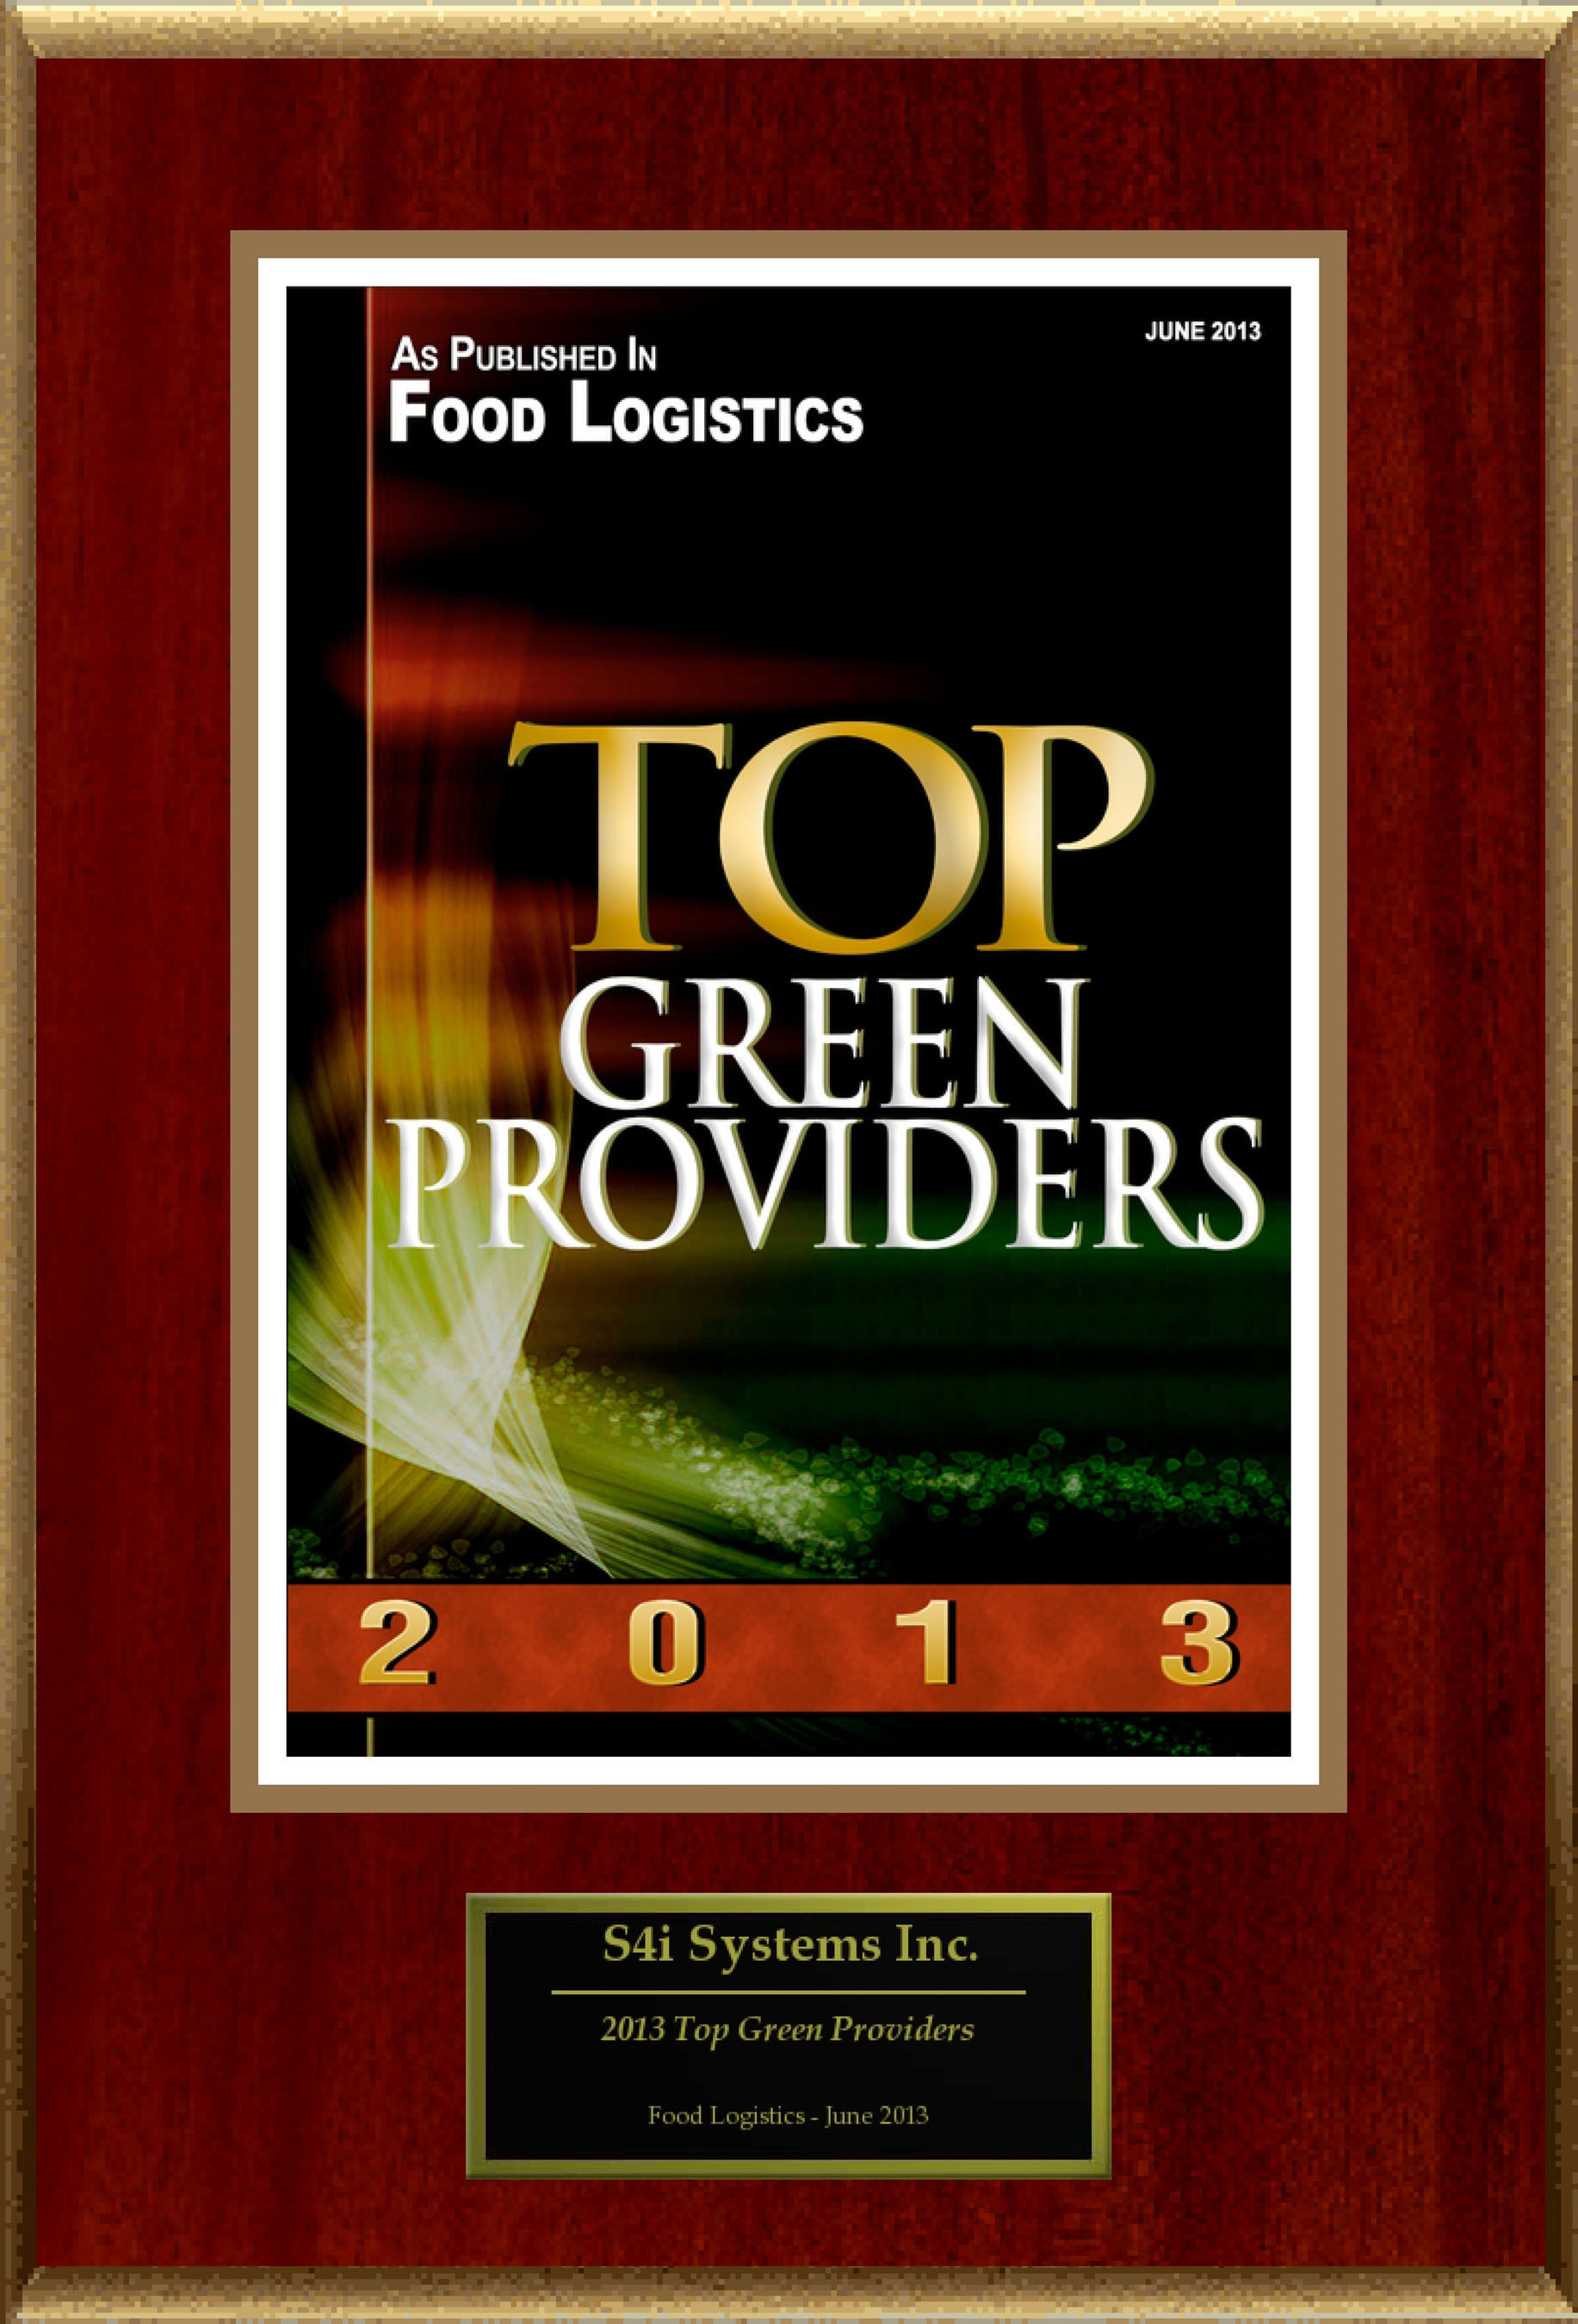 S4i Systems Inc Selected For "2013 Top Green Providers". (PRNewsFoto/S4i Systems Inc) (PRNewsFoto/S4I SYSTEMS INC)